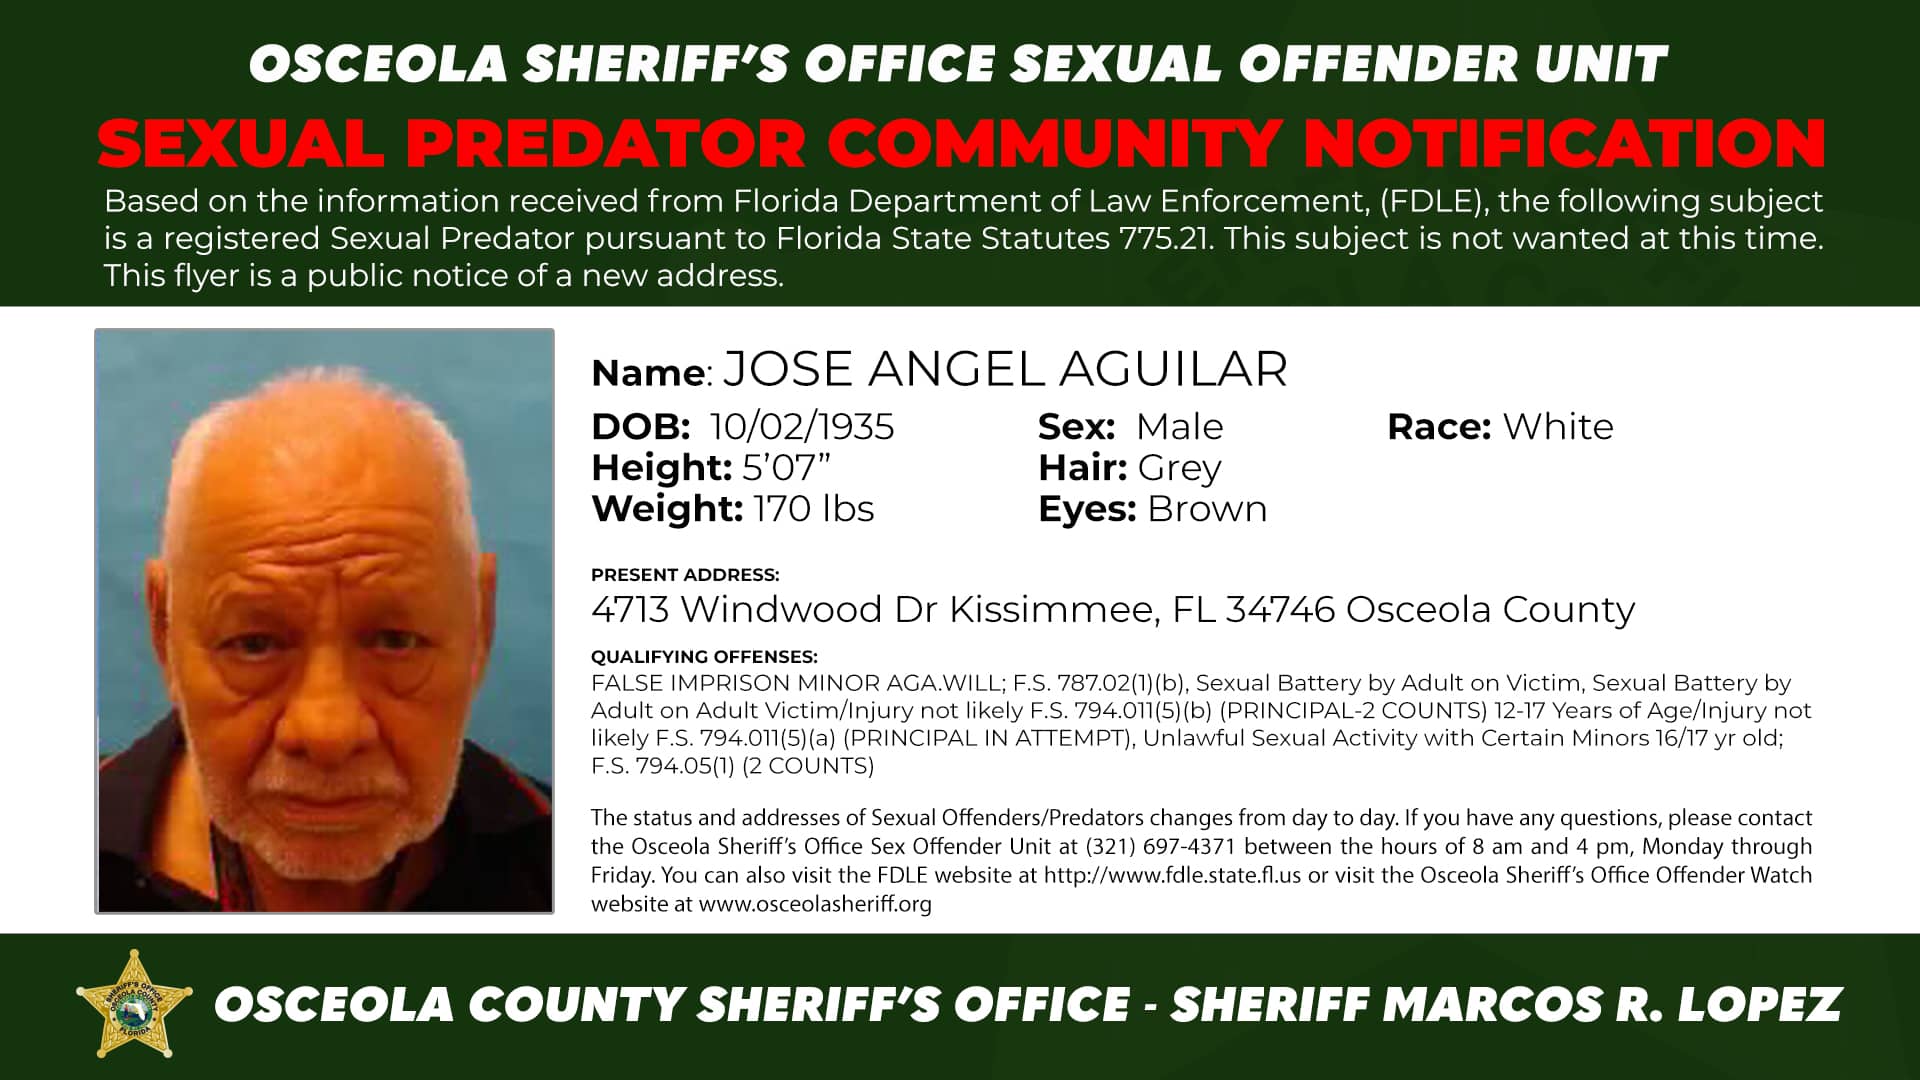 NCSO Offender Watch / Home